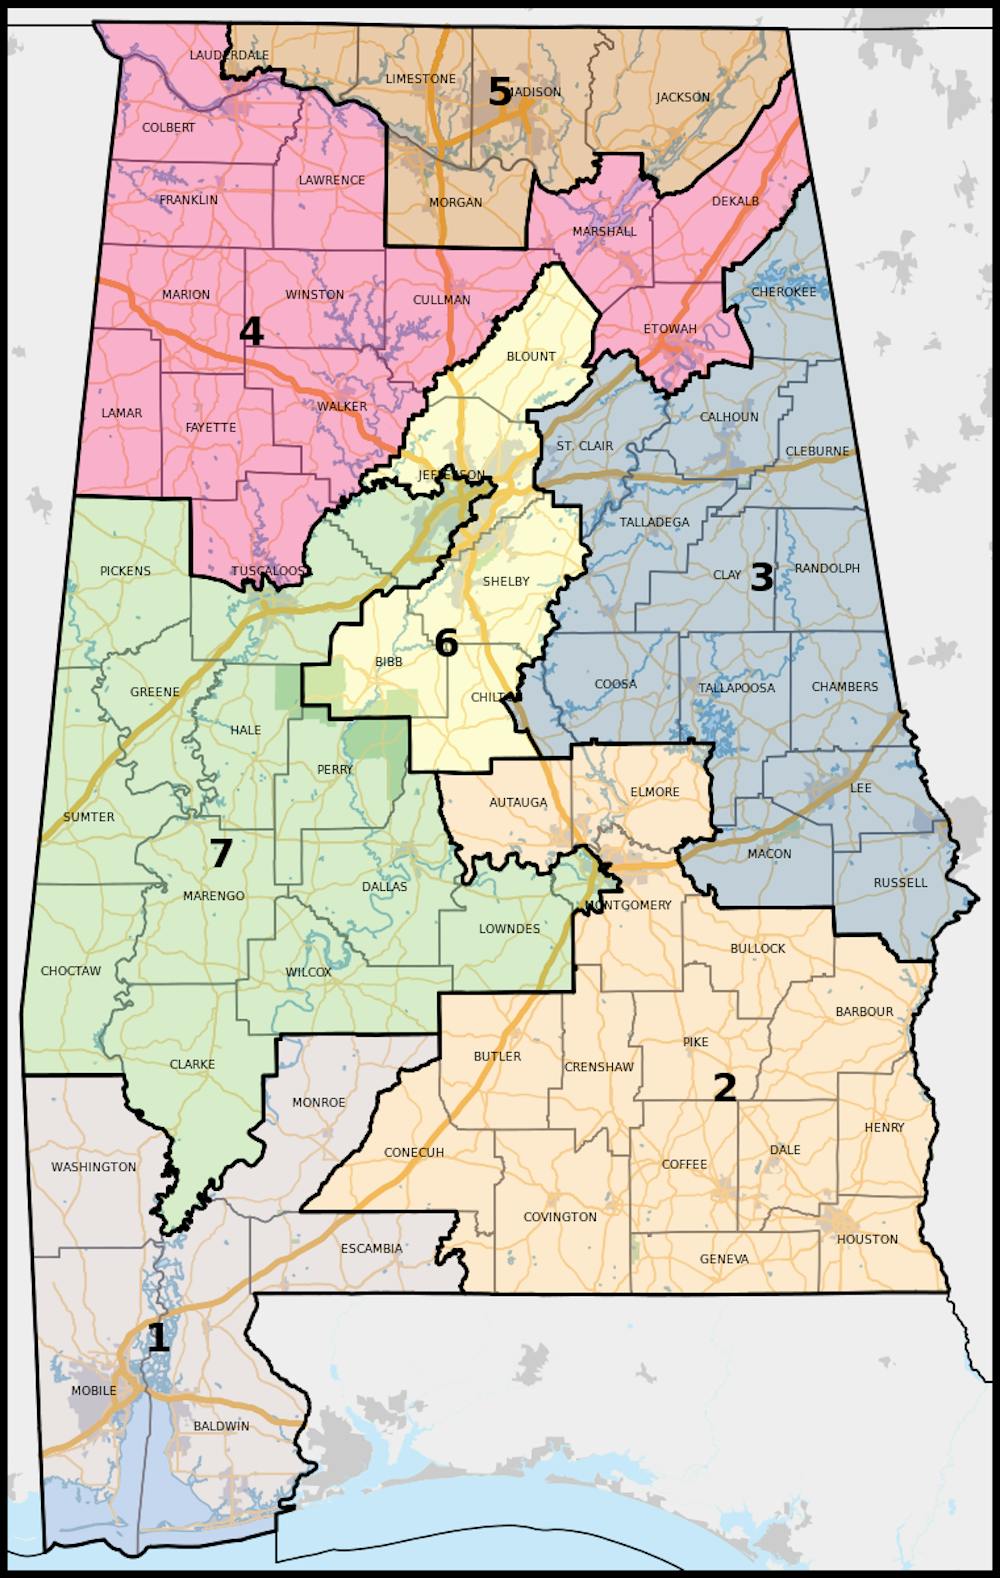 alabama-releases-revised-congressional-map-federal-judges-reject-it